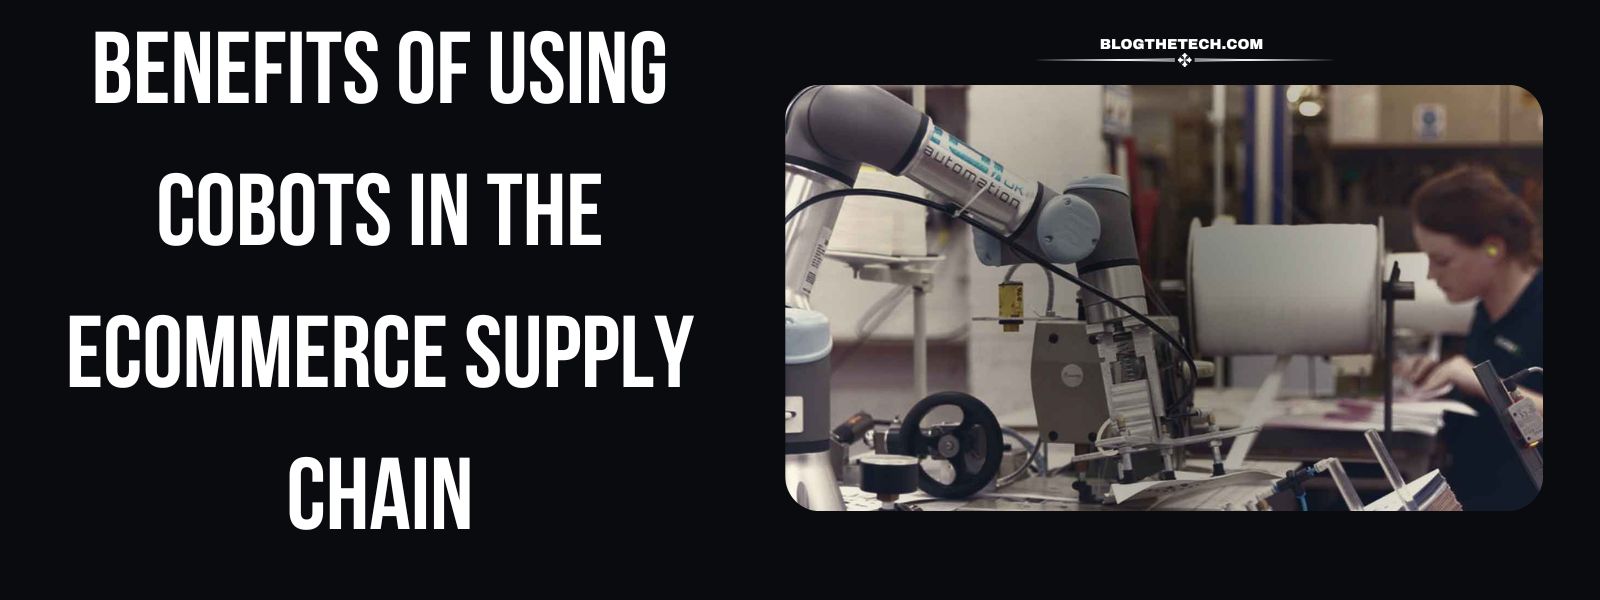 Using Cobots In The Ecommerce Supply Chain